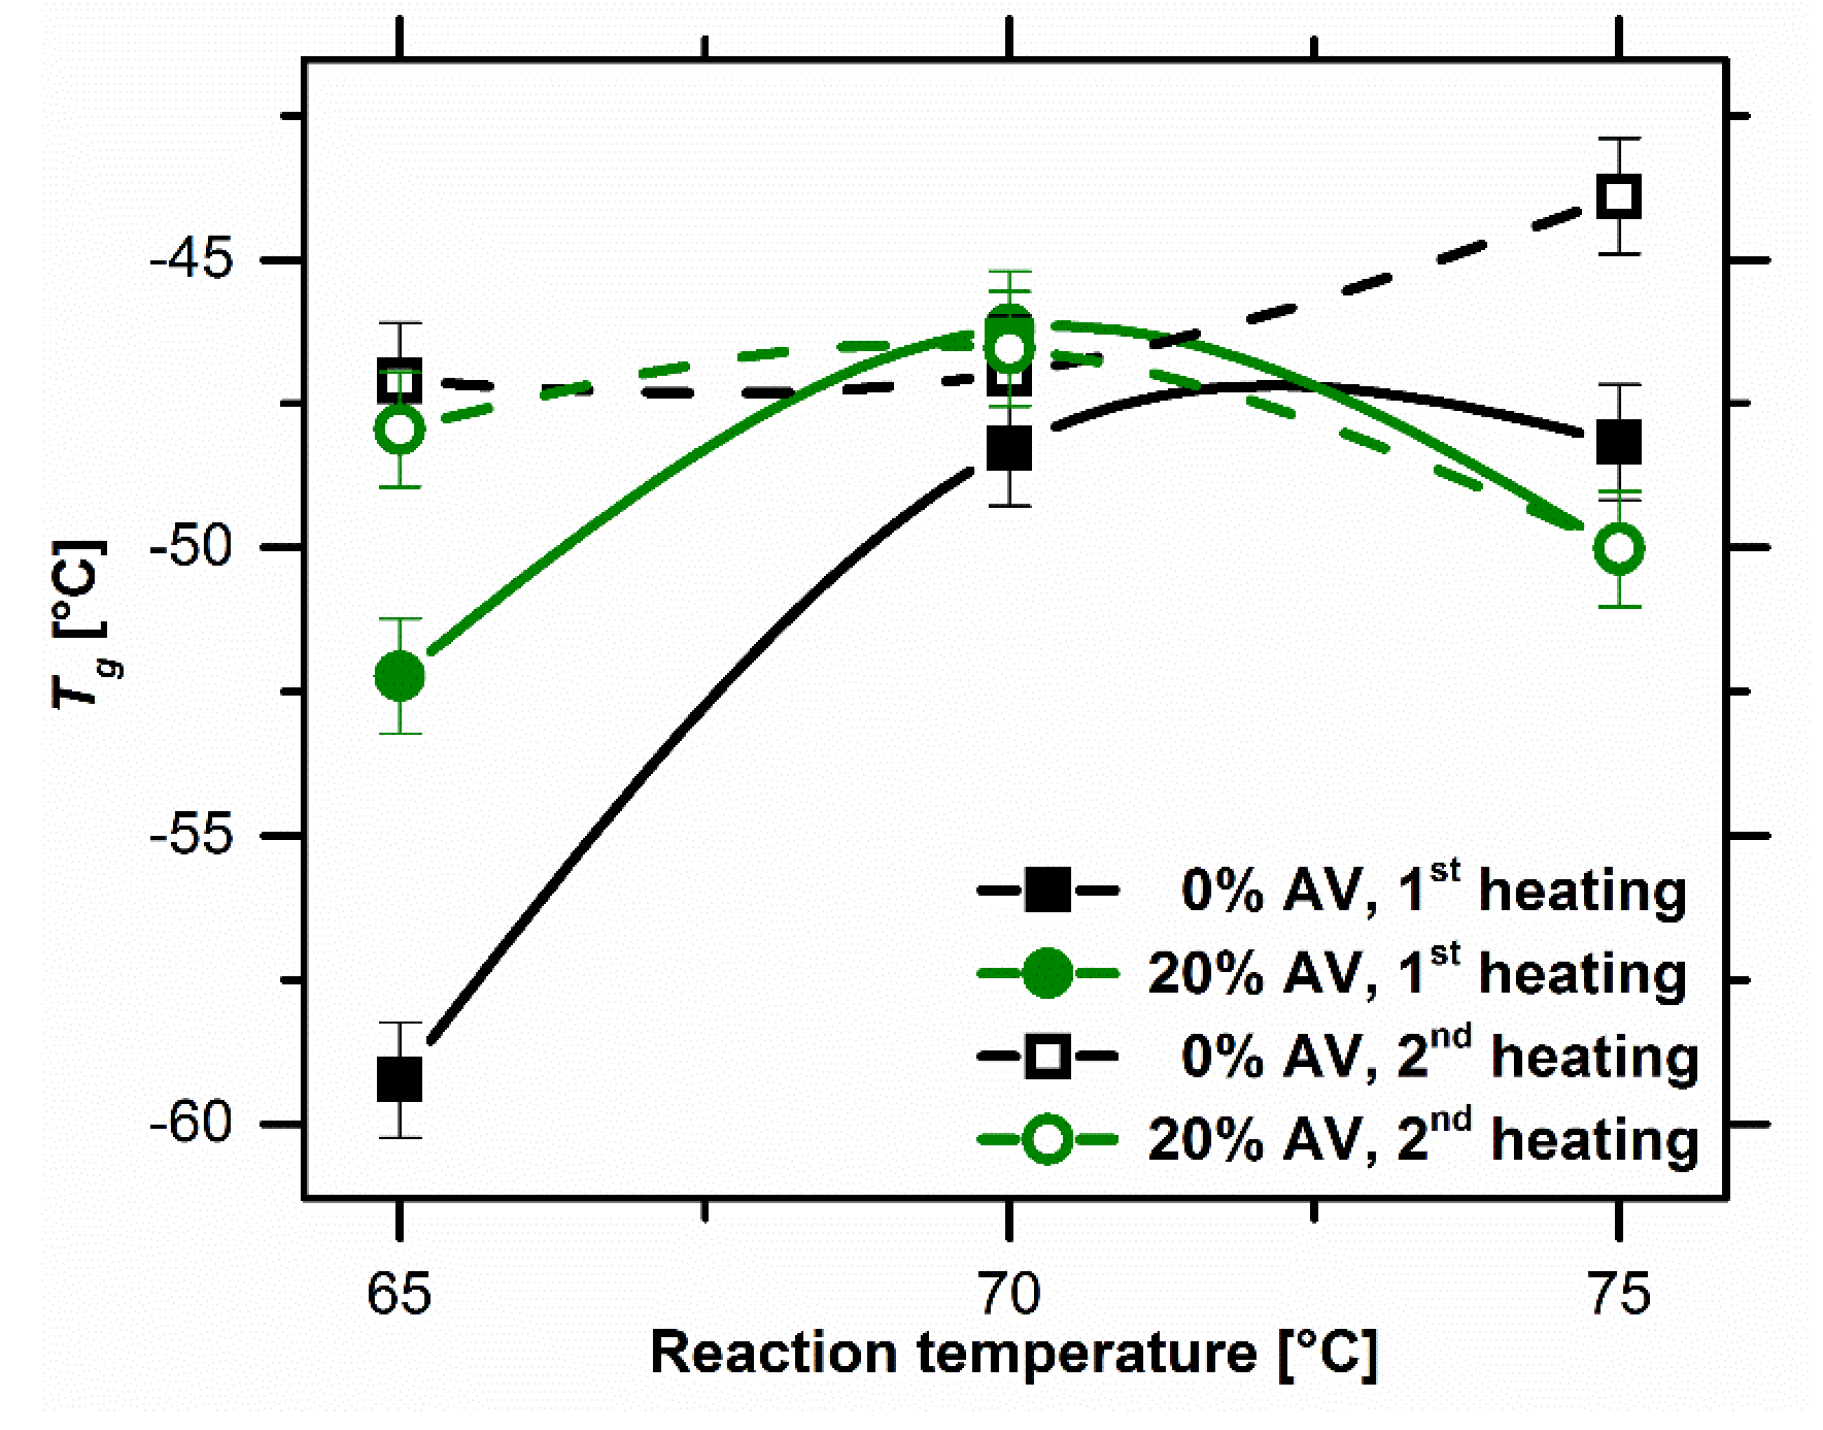 Glass transition temperature as a function of reaction temperature.